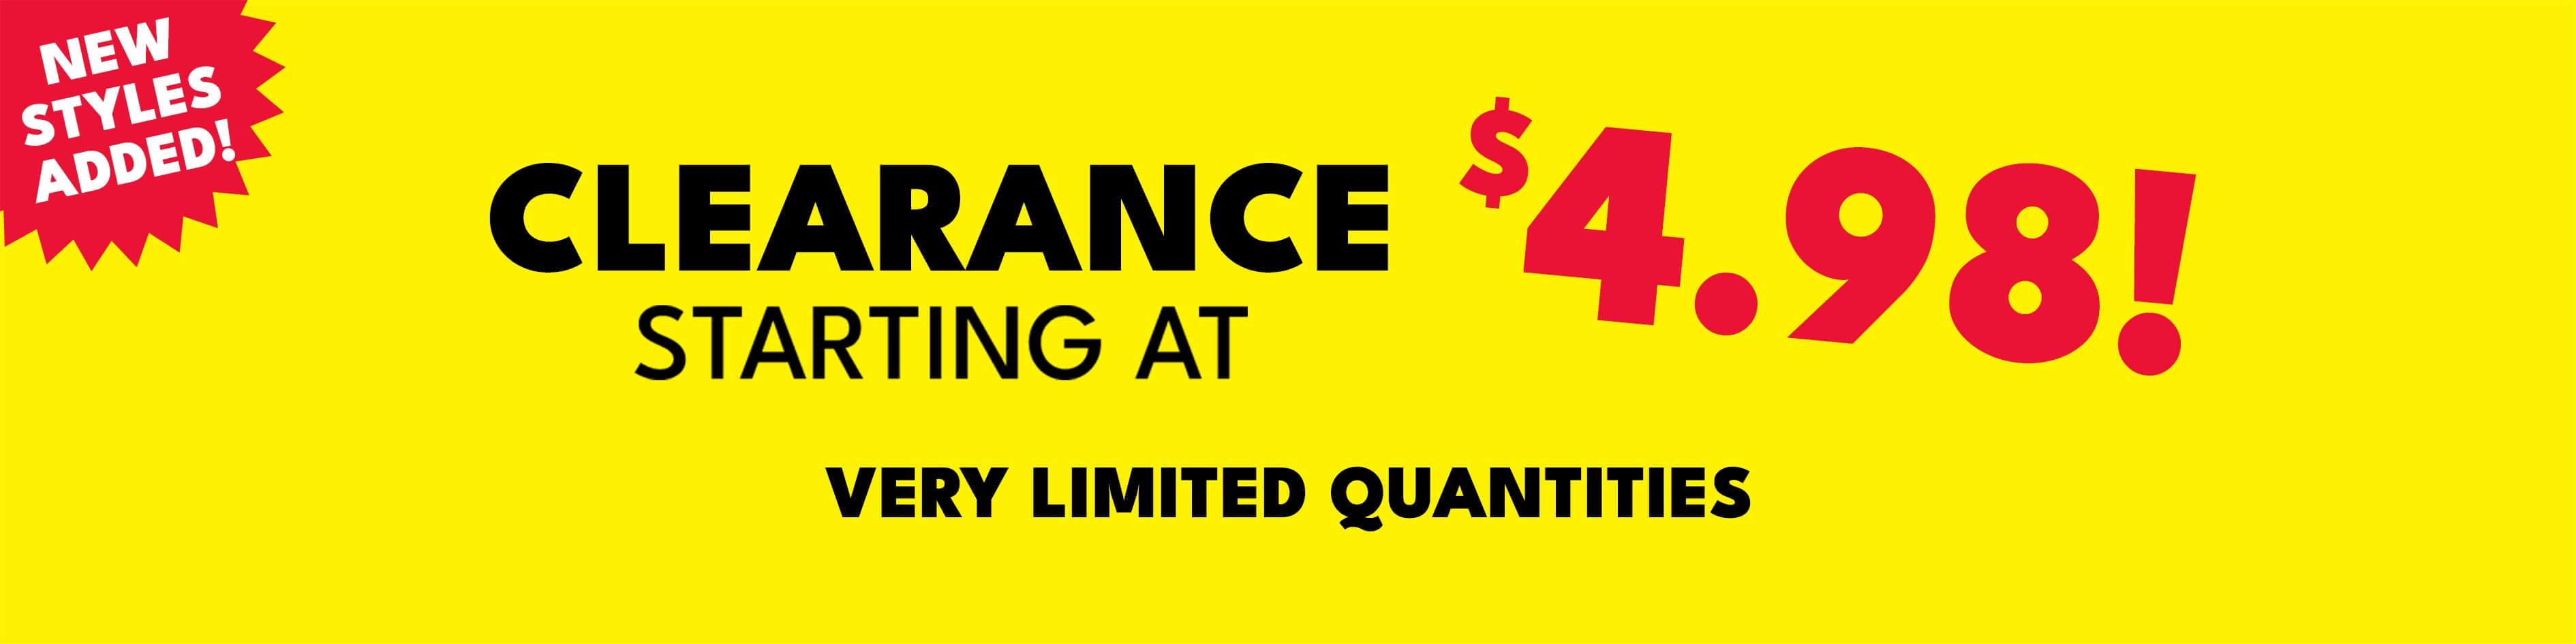 Clearance starting at $4.98! Very limited quantities